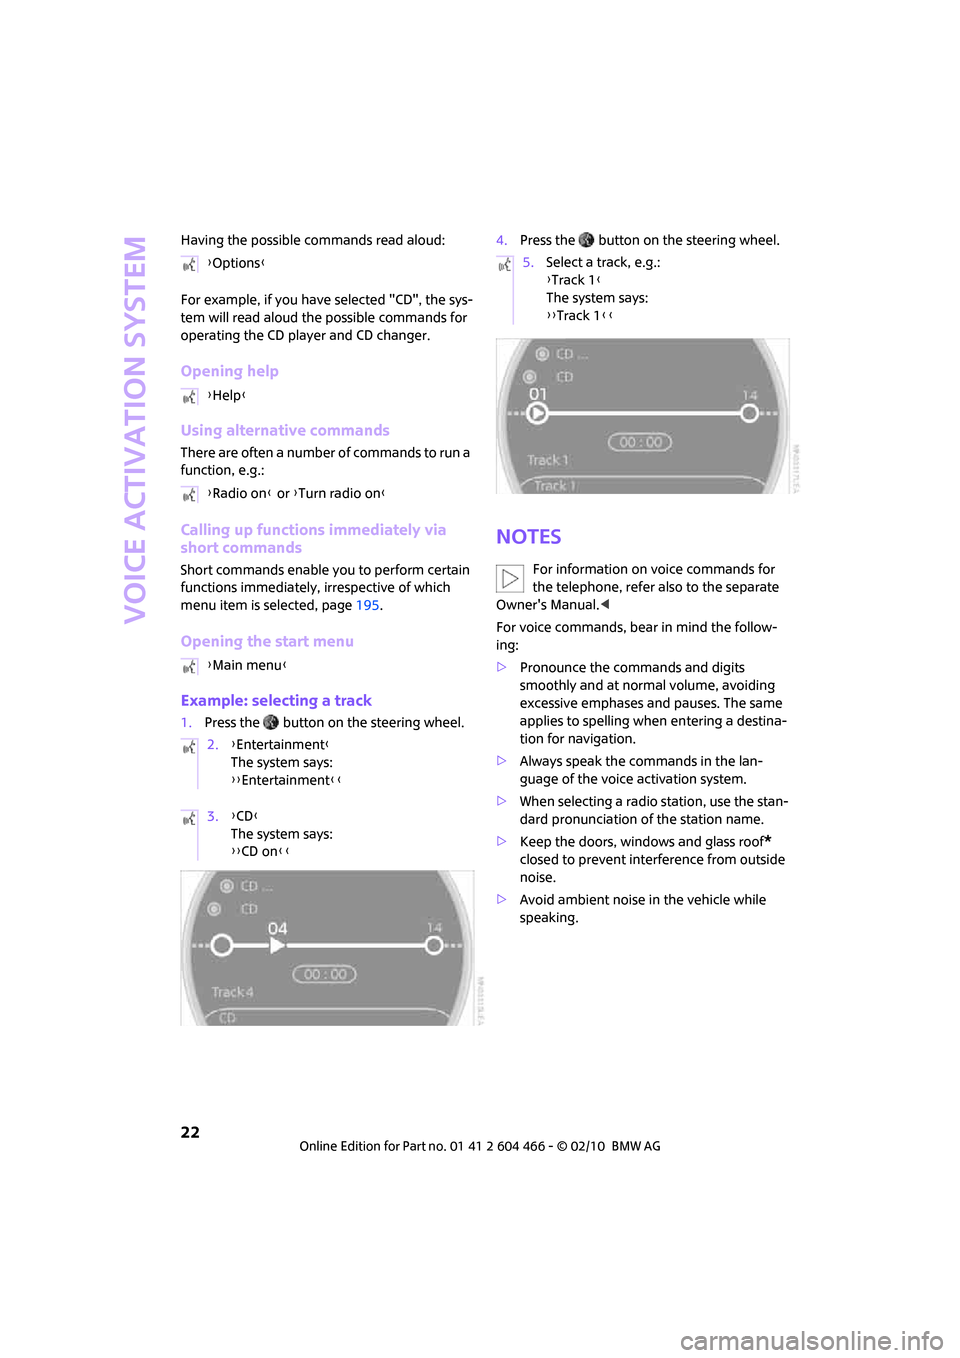 MINI Clubman 2010  Owners Manual (Mini Connected) Voice activation system
22
Having the possible commands read aloud:
For example, if you have selected "CD", the sys-
tem will read aloud the possible commands for 
operating the CD player and CD chang